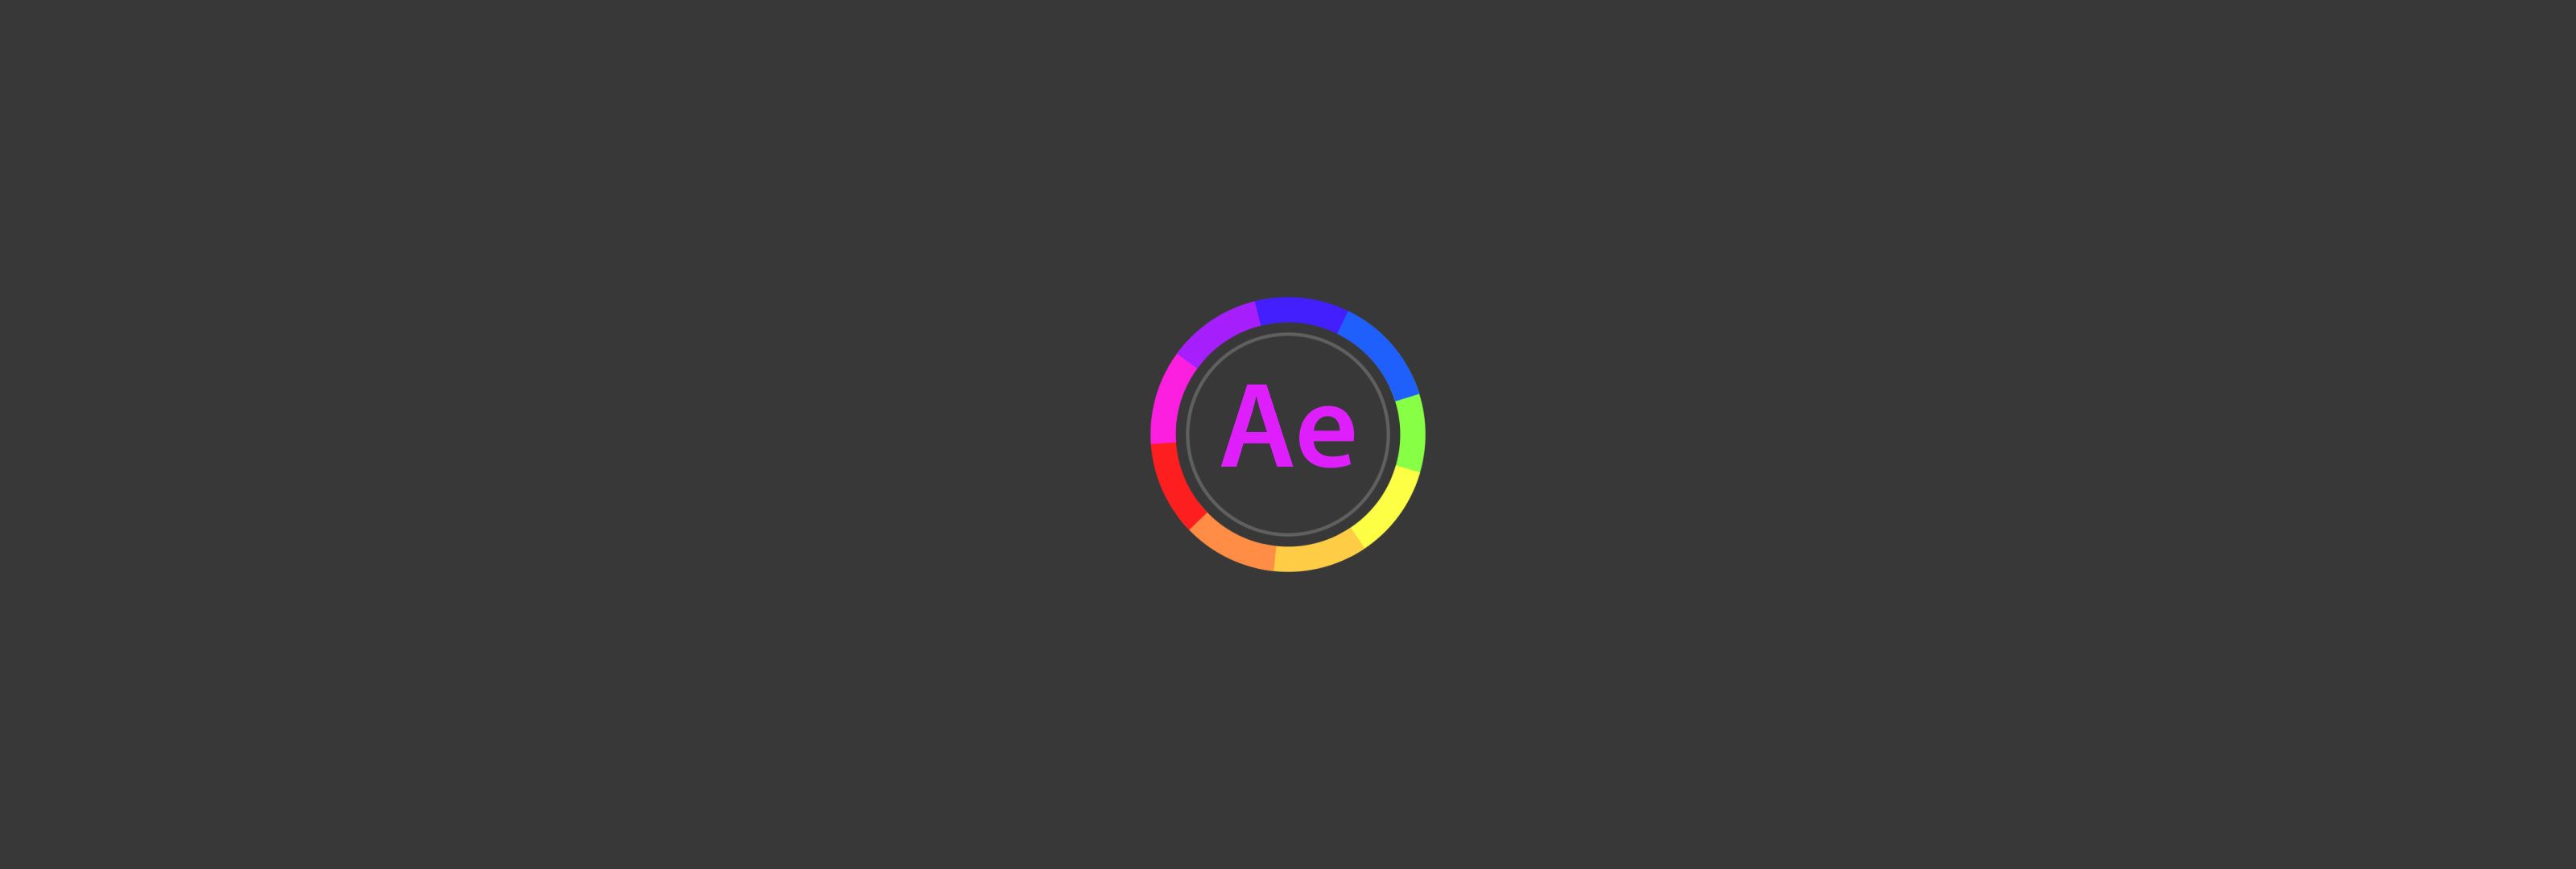 free presets for after effects